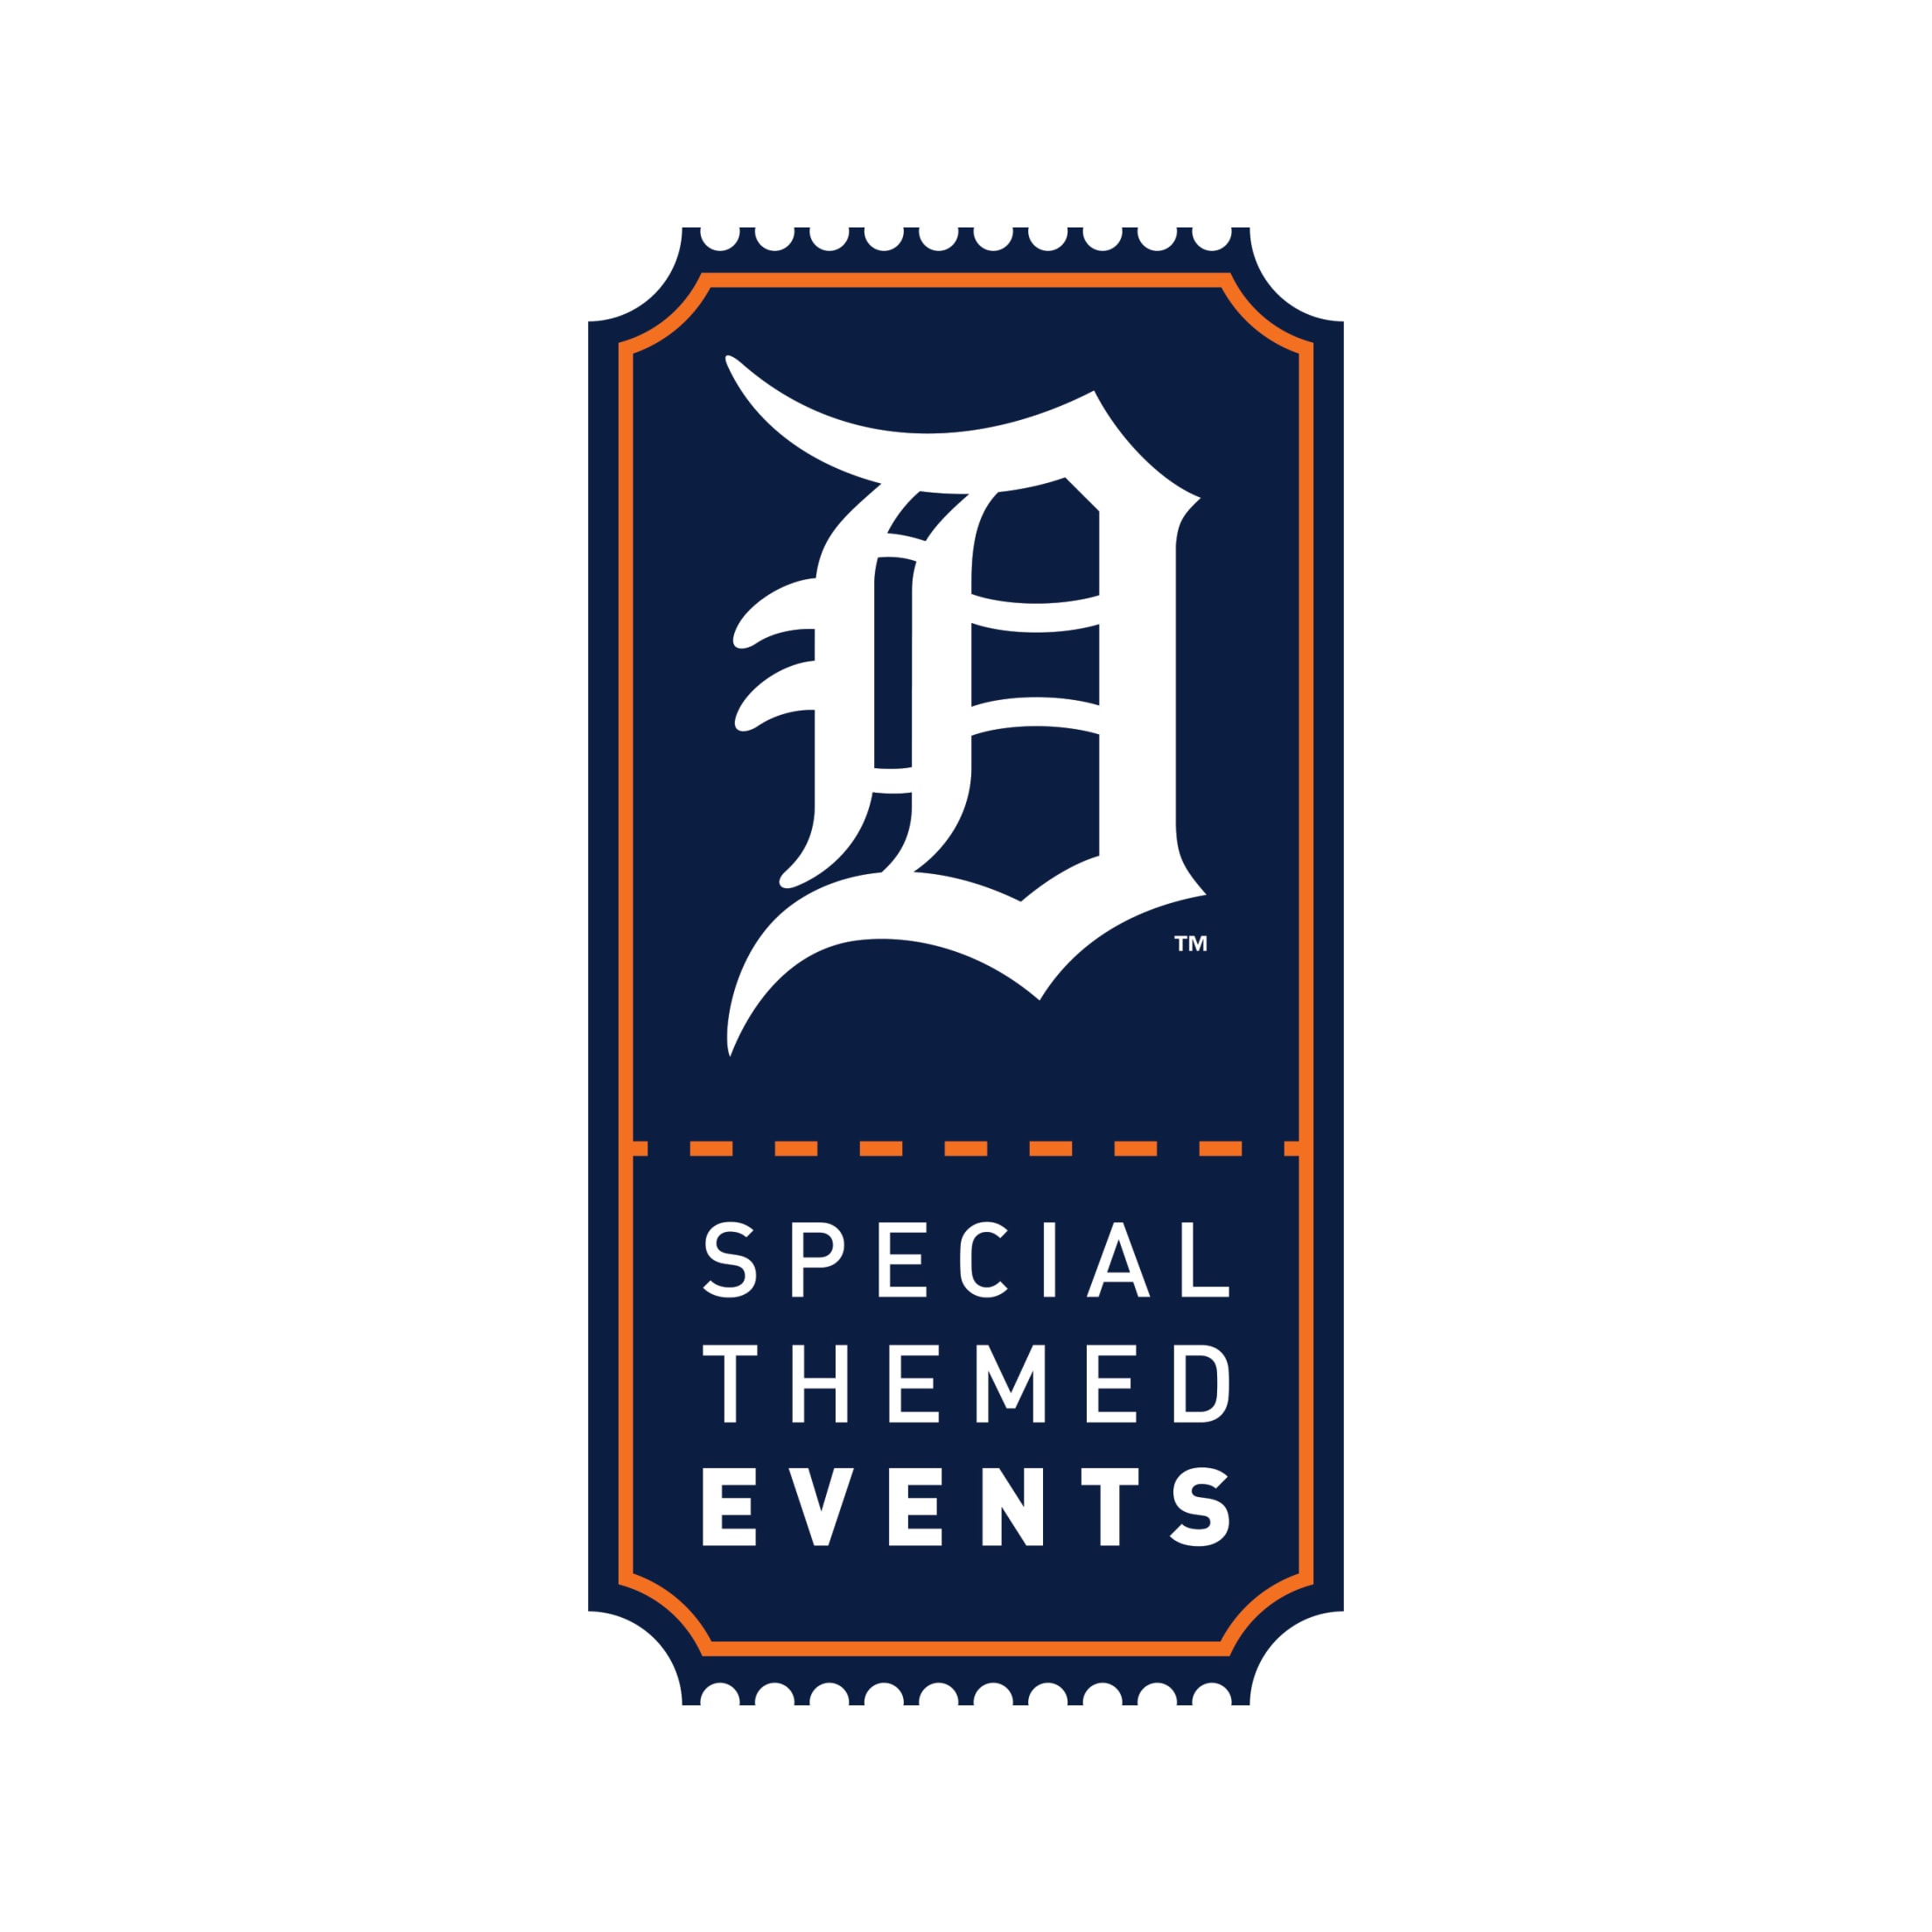 Detroit Tigers: Fiesta Tigres Is Much More Than a Promotional Night